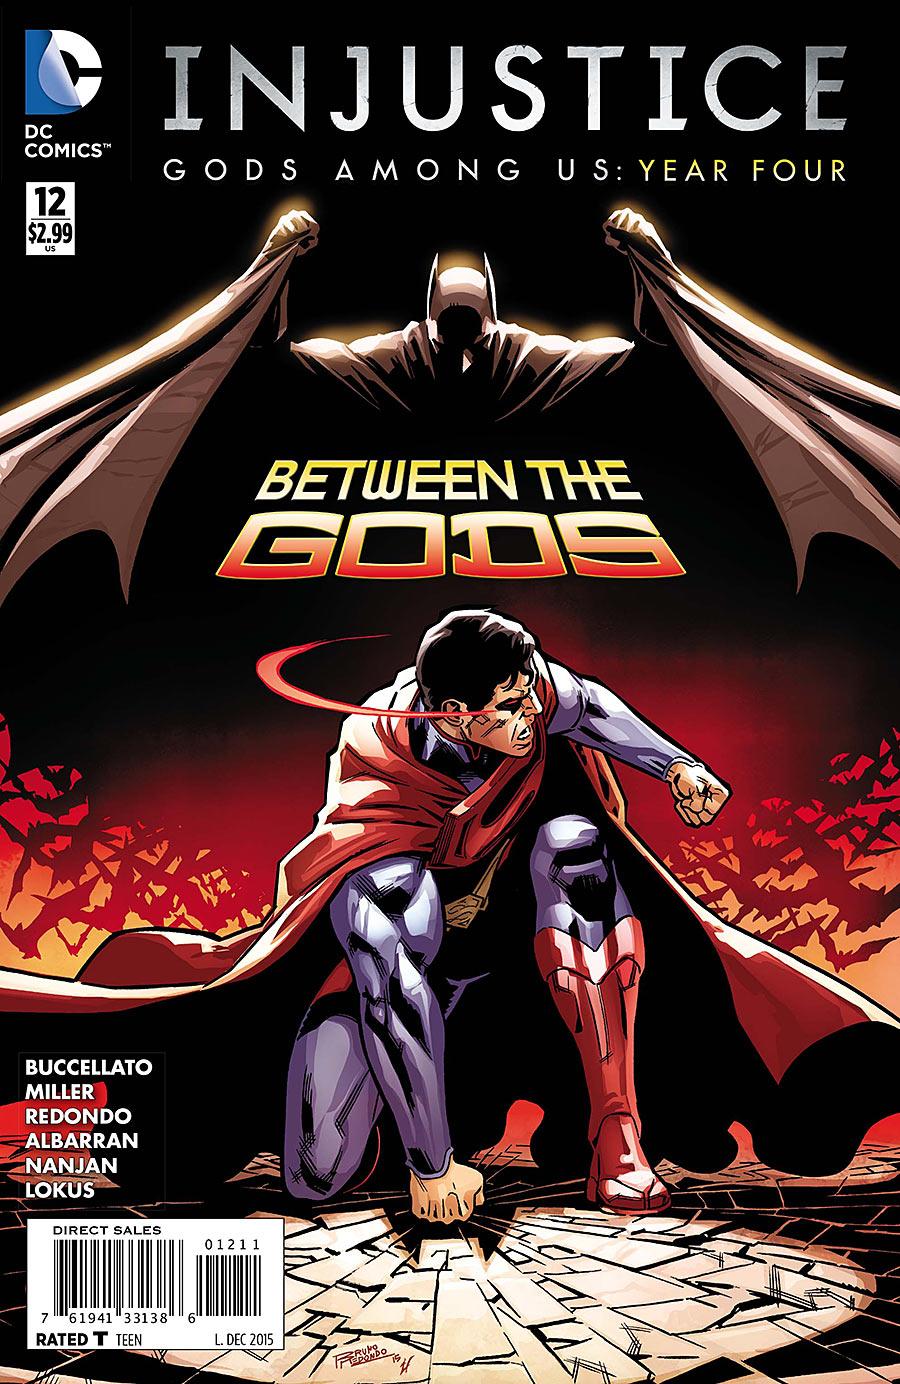 Injustice: Gods Among Us: Year Four Vol. 1 #12